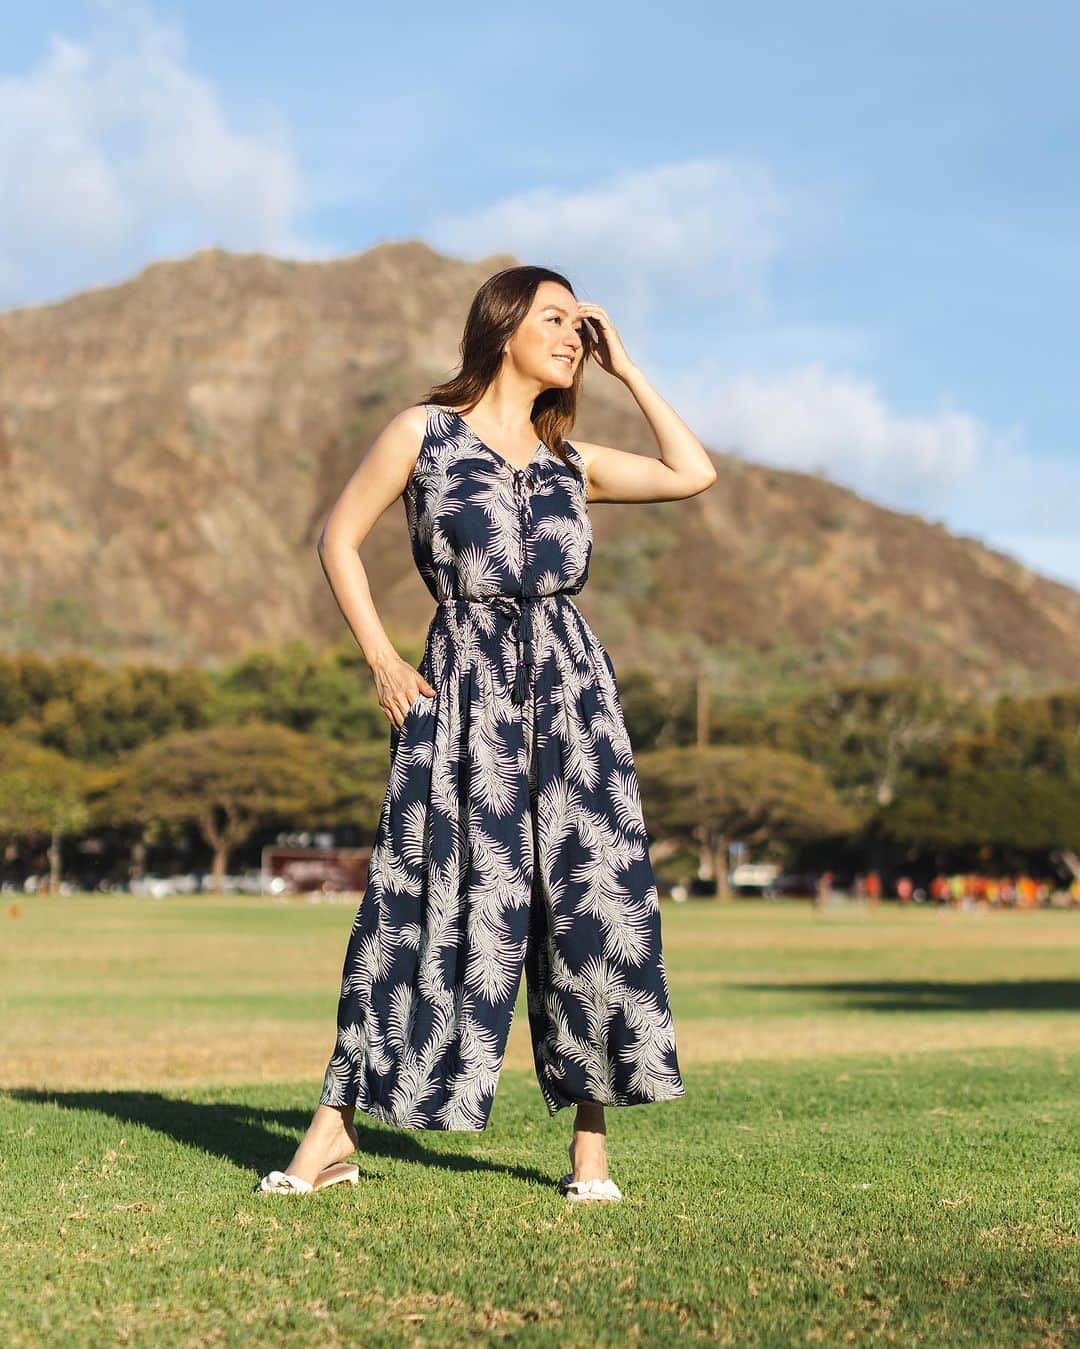 Angels By The Sea Hawaii Waikiki Based Boutiques ?Original clothing designed さんのインスタグラム写真 - (Angels By The Sea Hawaii Waikiki Based Boutiques ?Original clothing designed Instagram)「Beautiful Setup @angelsbythesea  上品な椰子の葉シリーズのセットアップ  現在5色で展開中 5 colors available online  *アウトラインは3色で展開中  Top: Koa Top Leaves Print  (Gold, Black, Navy, Sand/Navy, Olive) Size: XS - XXL  Bottom: Kimo Palm Leaves Print Wide Pants (Gold, Black, Navy, Sand/Navy, Olive) Size: one size  📸 @nina_bythesea  📍 Honolulu, Hawaii   @angelsbythesea has been Hawaii’s resort fashion brand based in Honolulu, Hawaii, since 2010. Please visit our online store 🌺www.angelsbytheseahawaii.com Owner Designer Nina Thai (Miss Waikiki) @nina_bythesea (日本語勉強中📚🙇🏻‍♀️) Please feel free to tag your pic for a chance to be featured!  ハワイのリゾートファッション、 エンジェルズバイザシー はミスワイキキである Nina Thai によって作られたハワイオリジナルファッションブランドです🌴日本語ウェブサイトはこちら www.angelsbytheseahawaii.jp  ハワイやリゾートファッションが好きな人は是非私達のアカウントをフォローして下さい🙌また私達の商品をポストする際にタグ付けしていただいたら私達からリポストされるチャンスがあります  #angelsbytheseahawaii #angelsbythesea #resortwearw #hawaii #waikiki  #ハワイ #ワイキキ #カイルア #ラニカイビーチ #シンプルコーデ #エンジェルズバイザシーハワイ #エンジェルズバイザシー #リゾートファッション #ハワイ限定 #하와이스냅 #하와이허니문스냅」9月19日 10時03分 - angelsbythesea